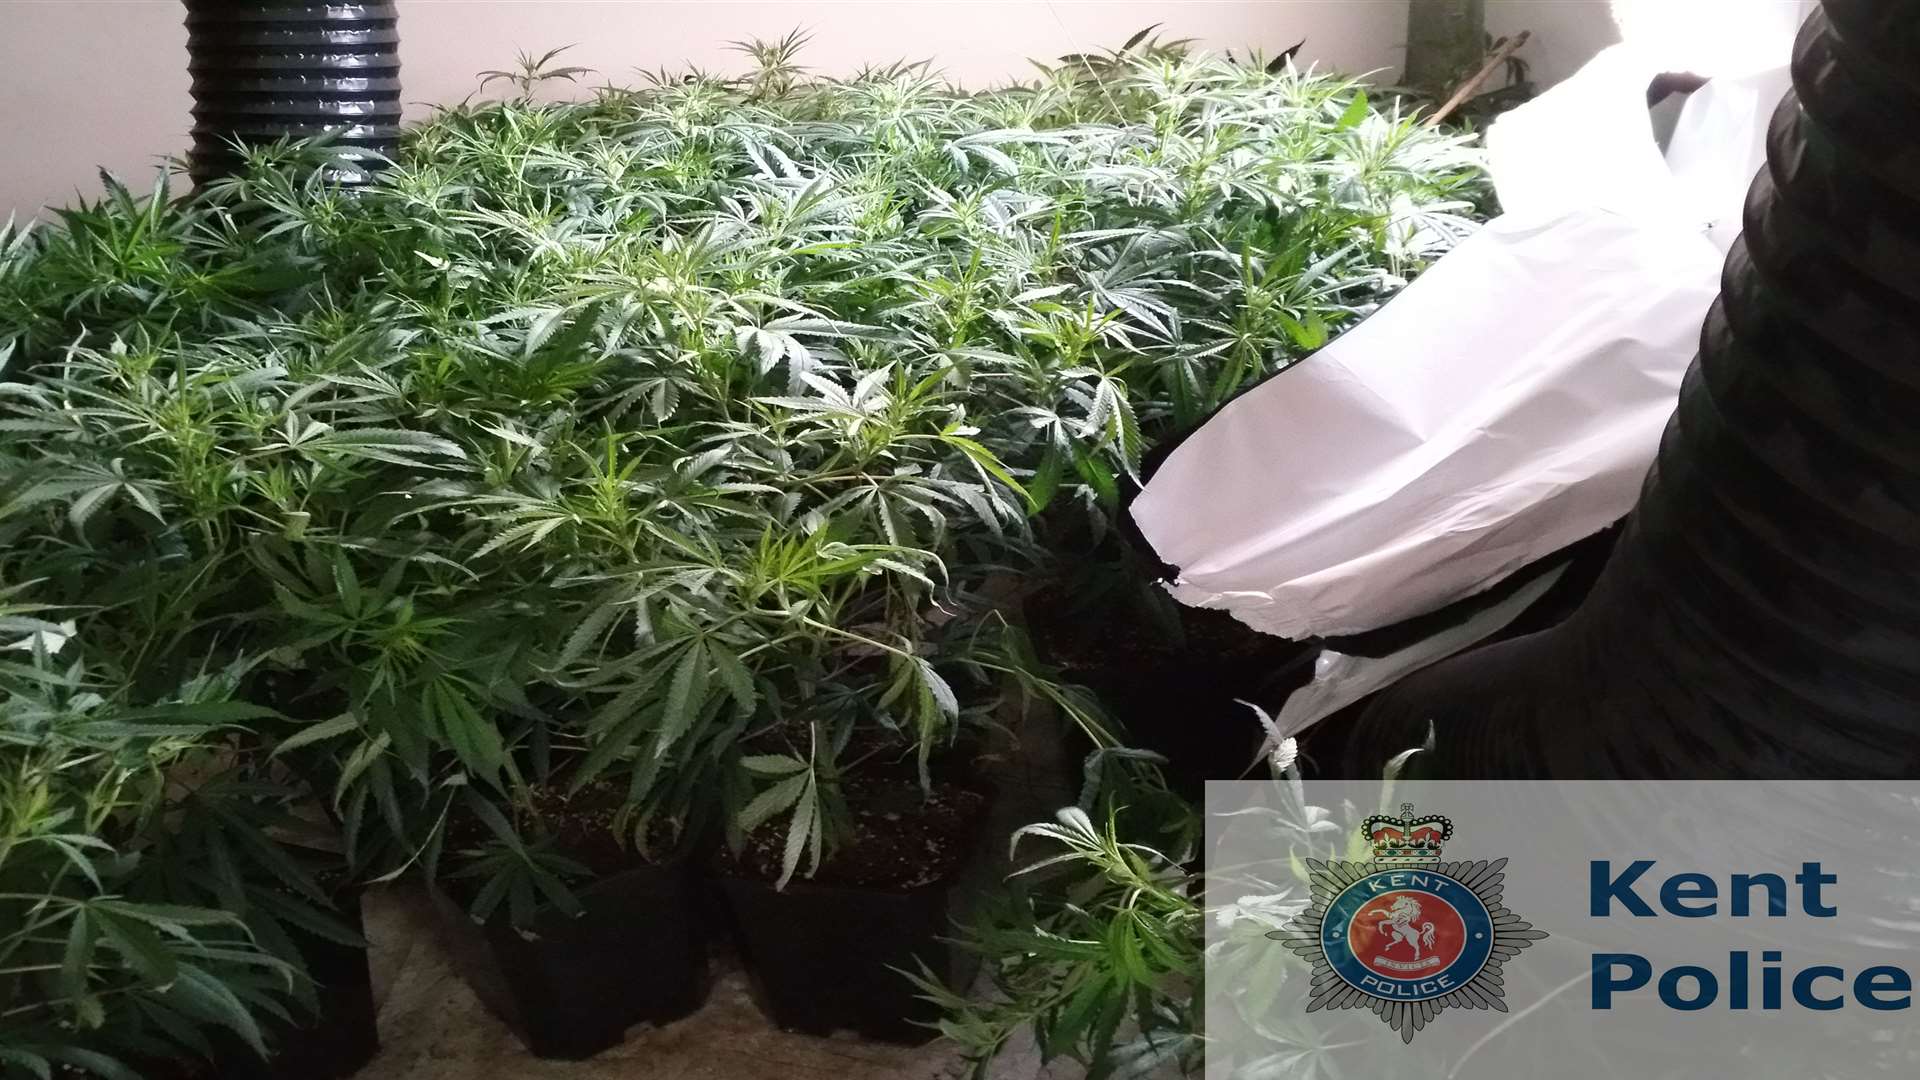 More than 200 plants were seized from a house in Cross Street, Maidstone, on Tuesday, December 2.